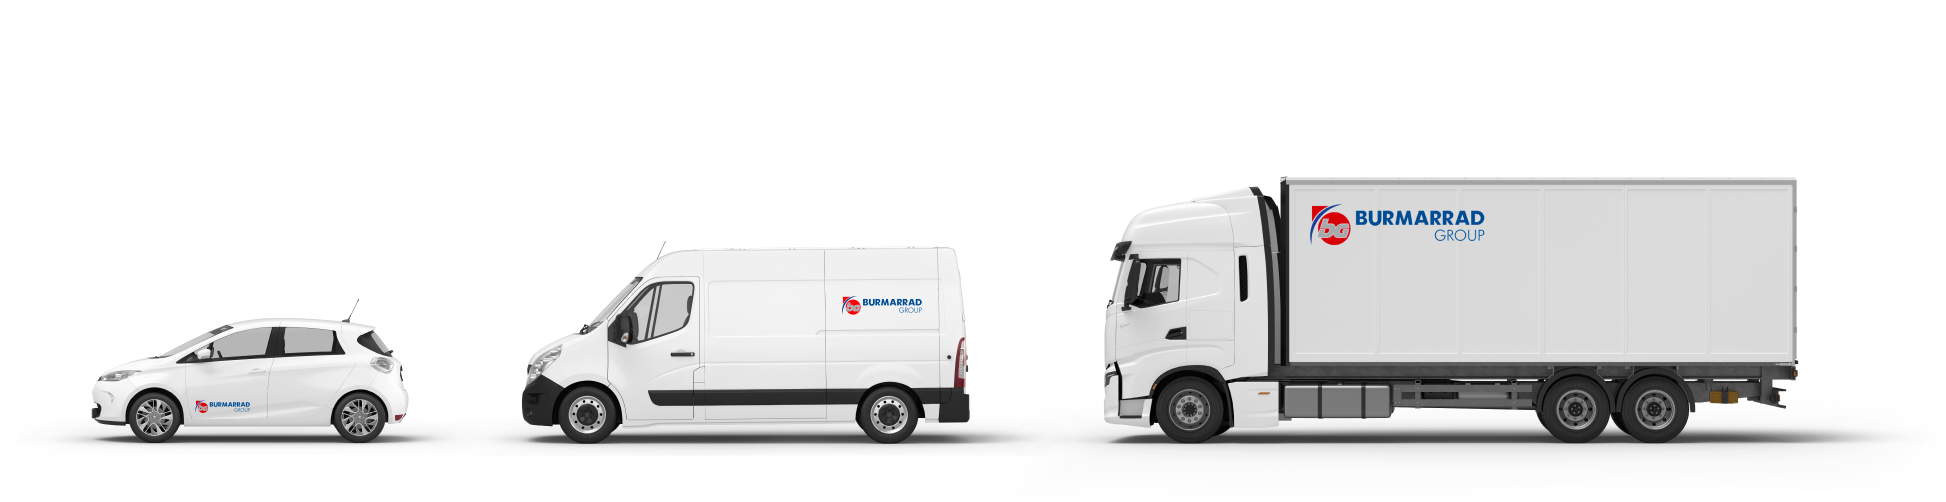 Burmarrad Group Truck Sales, Rentals and leasing